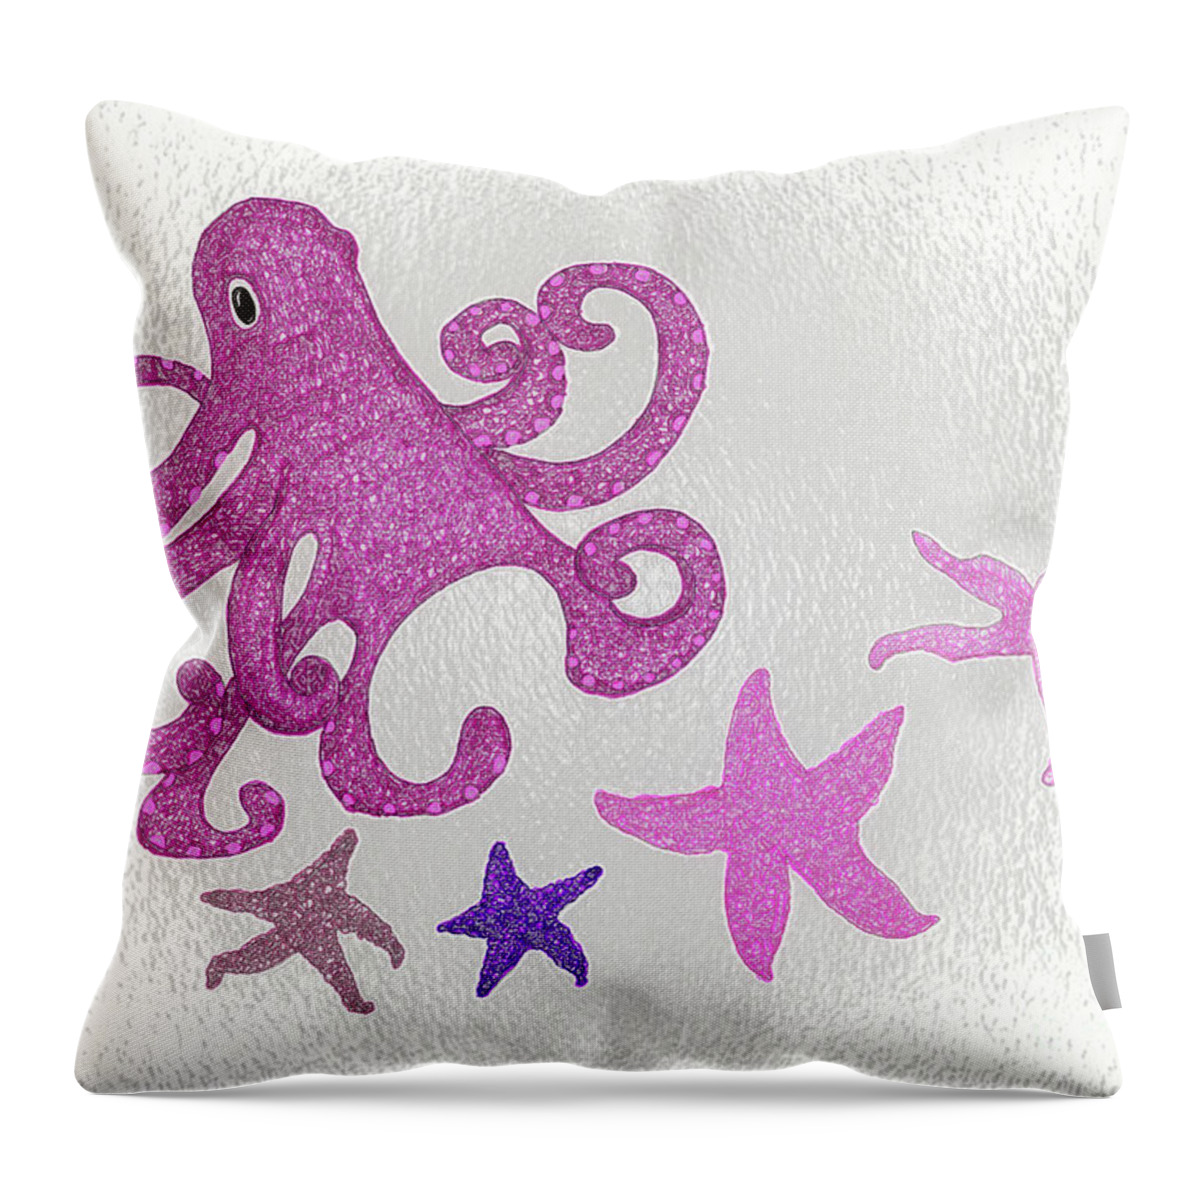 Ocean Creatures A Pen & Ink Watercolor Painting By Norma Appleton Throw Pillow featuring the painting Ocean Creatures by Norma Appleton